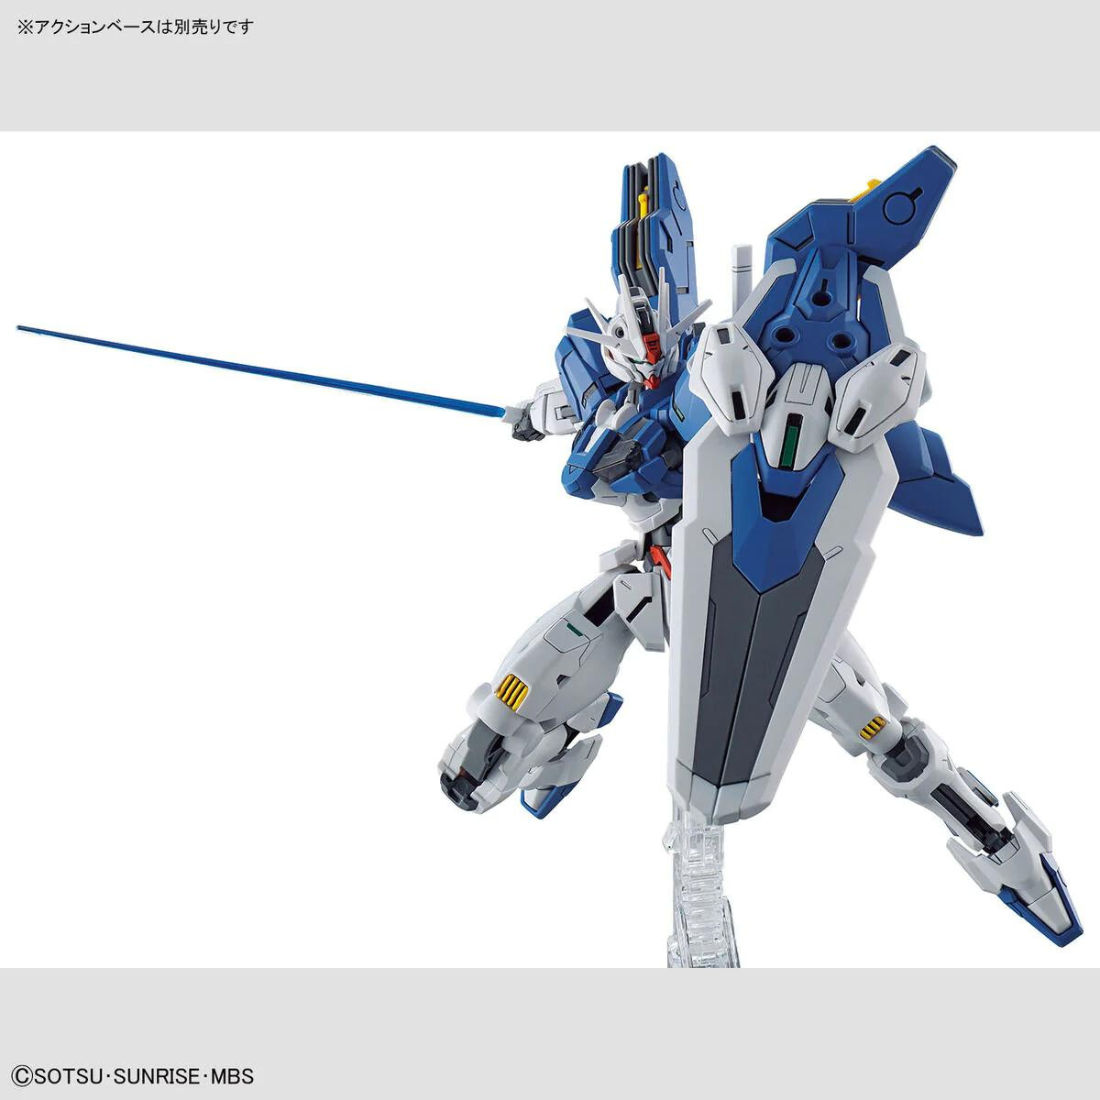 HG 1/144 The Witch from Mercury #19 XVX-016RN Gundam Aerial Rebuild #5065096 by Bandai